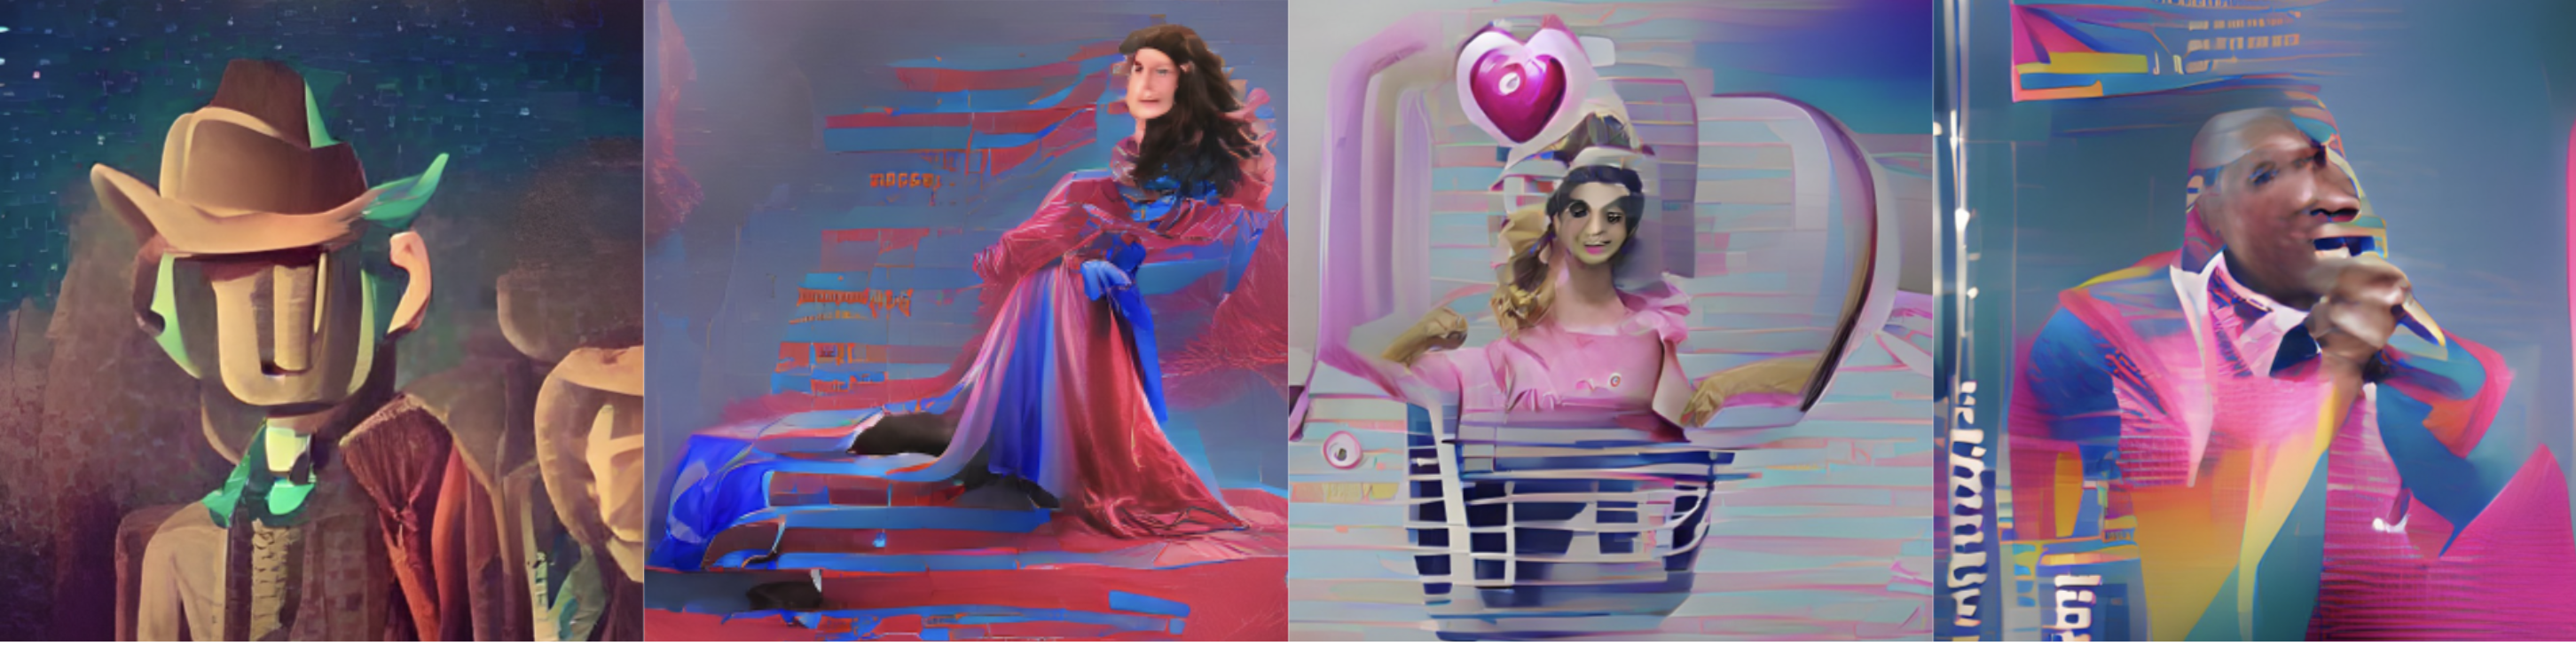 Images generated using Dream by WOMBO for “Long Lost” by Lord Huron, “Liability” by Lorde, “Electra Heart” by MARINA, and “Formula” by Labrinth based on song title, artist name, and album cover.